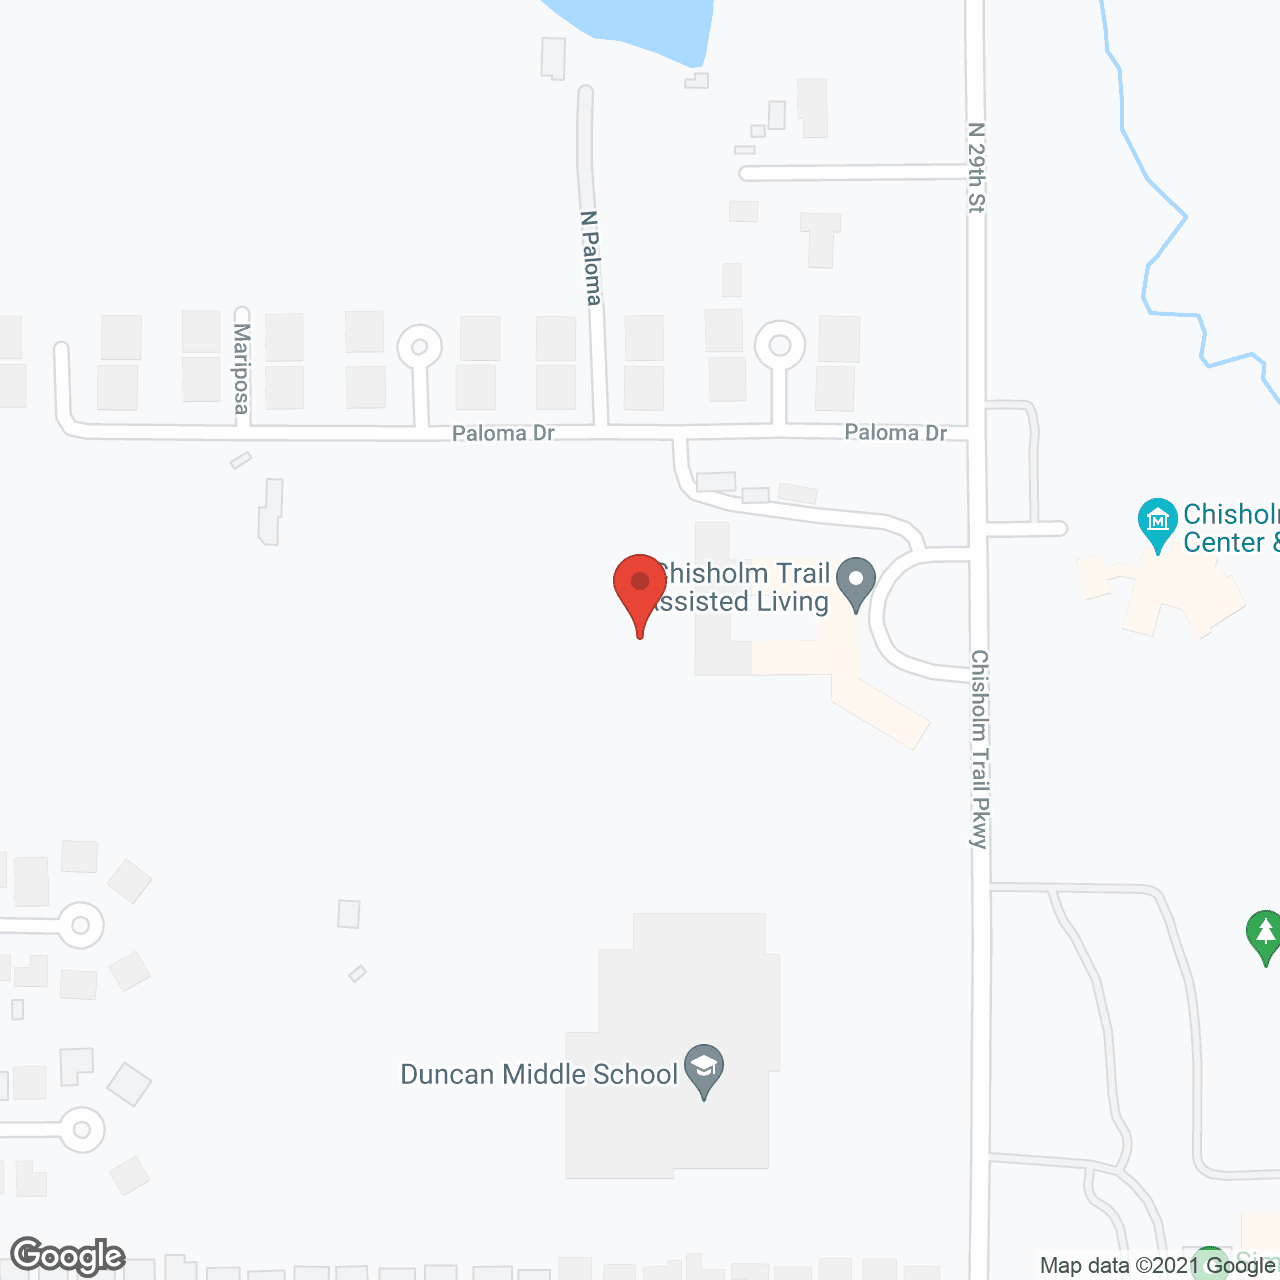 Chisholm Trail Assisted Living in google map